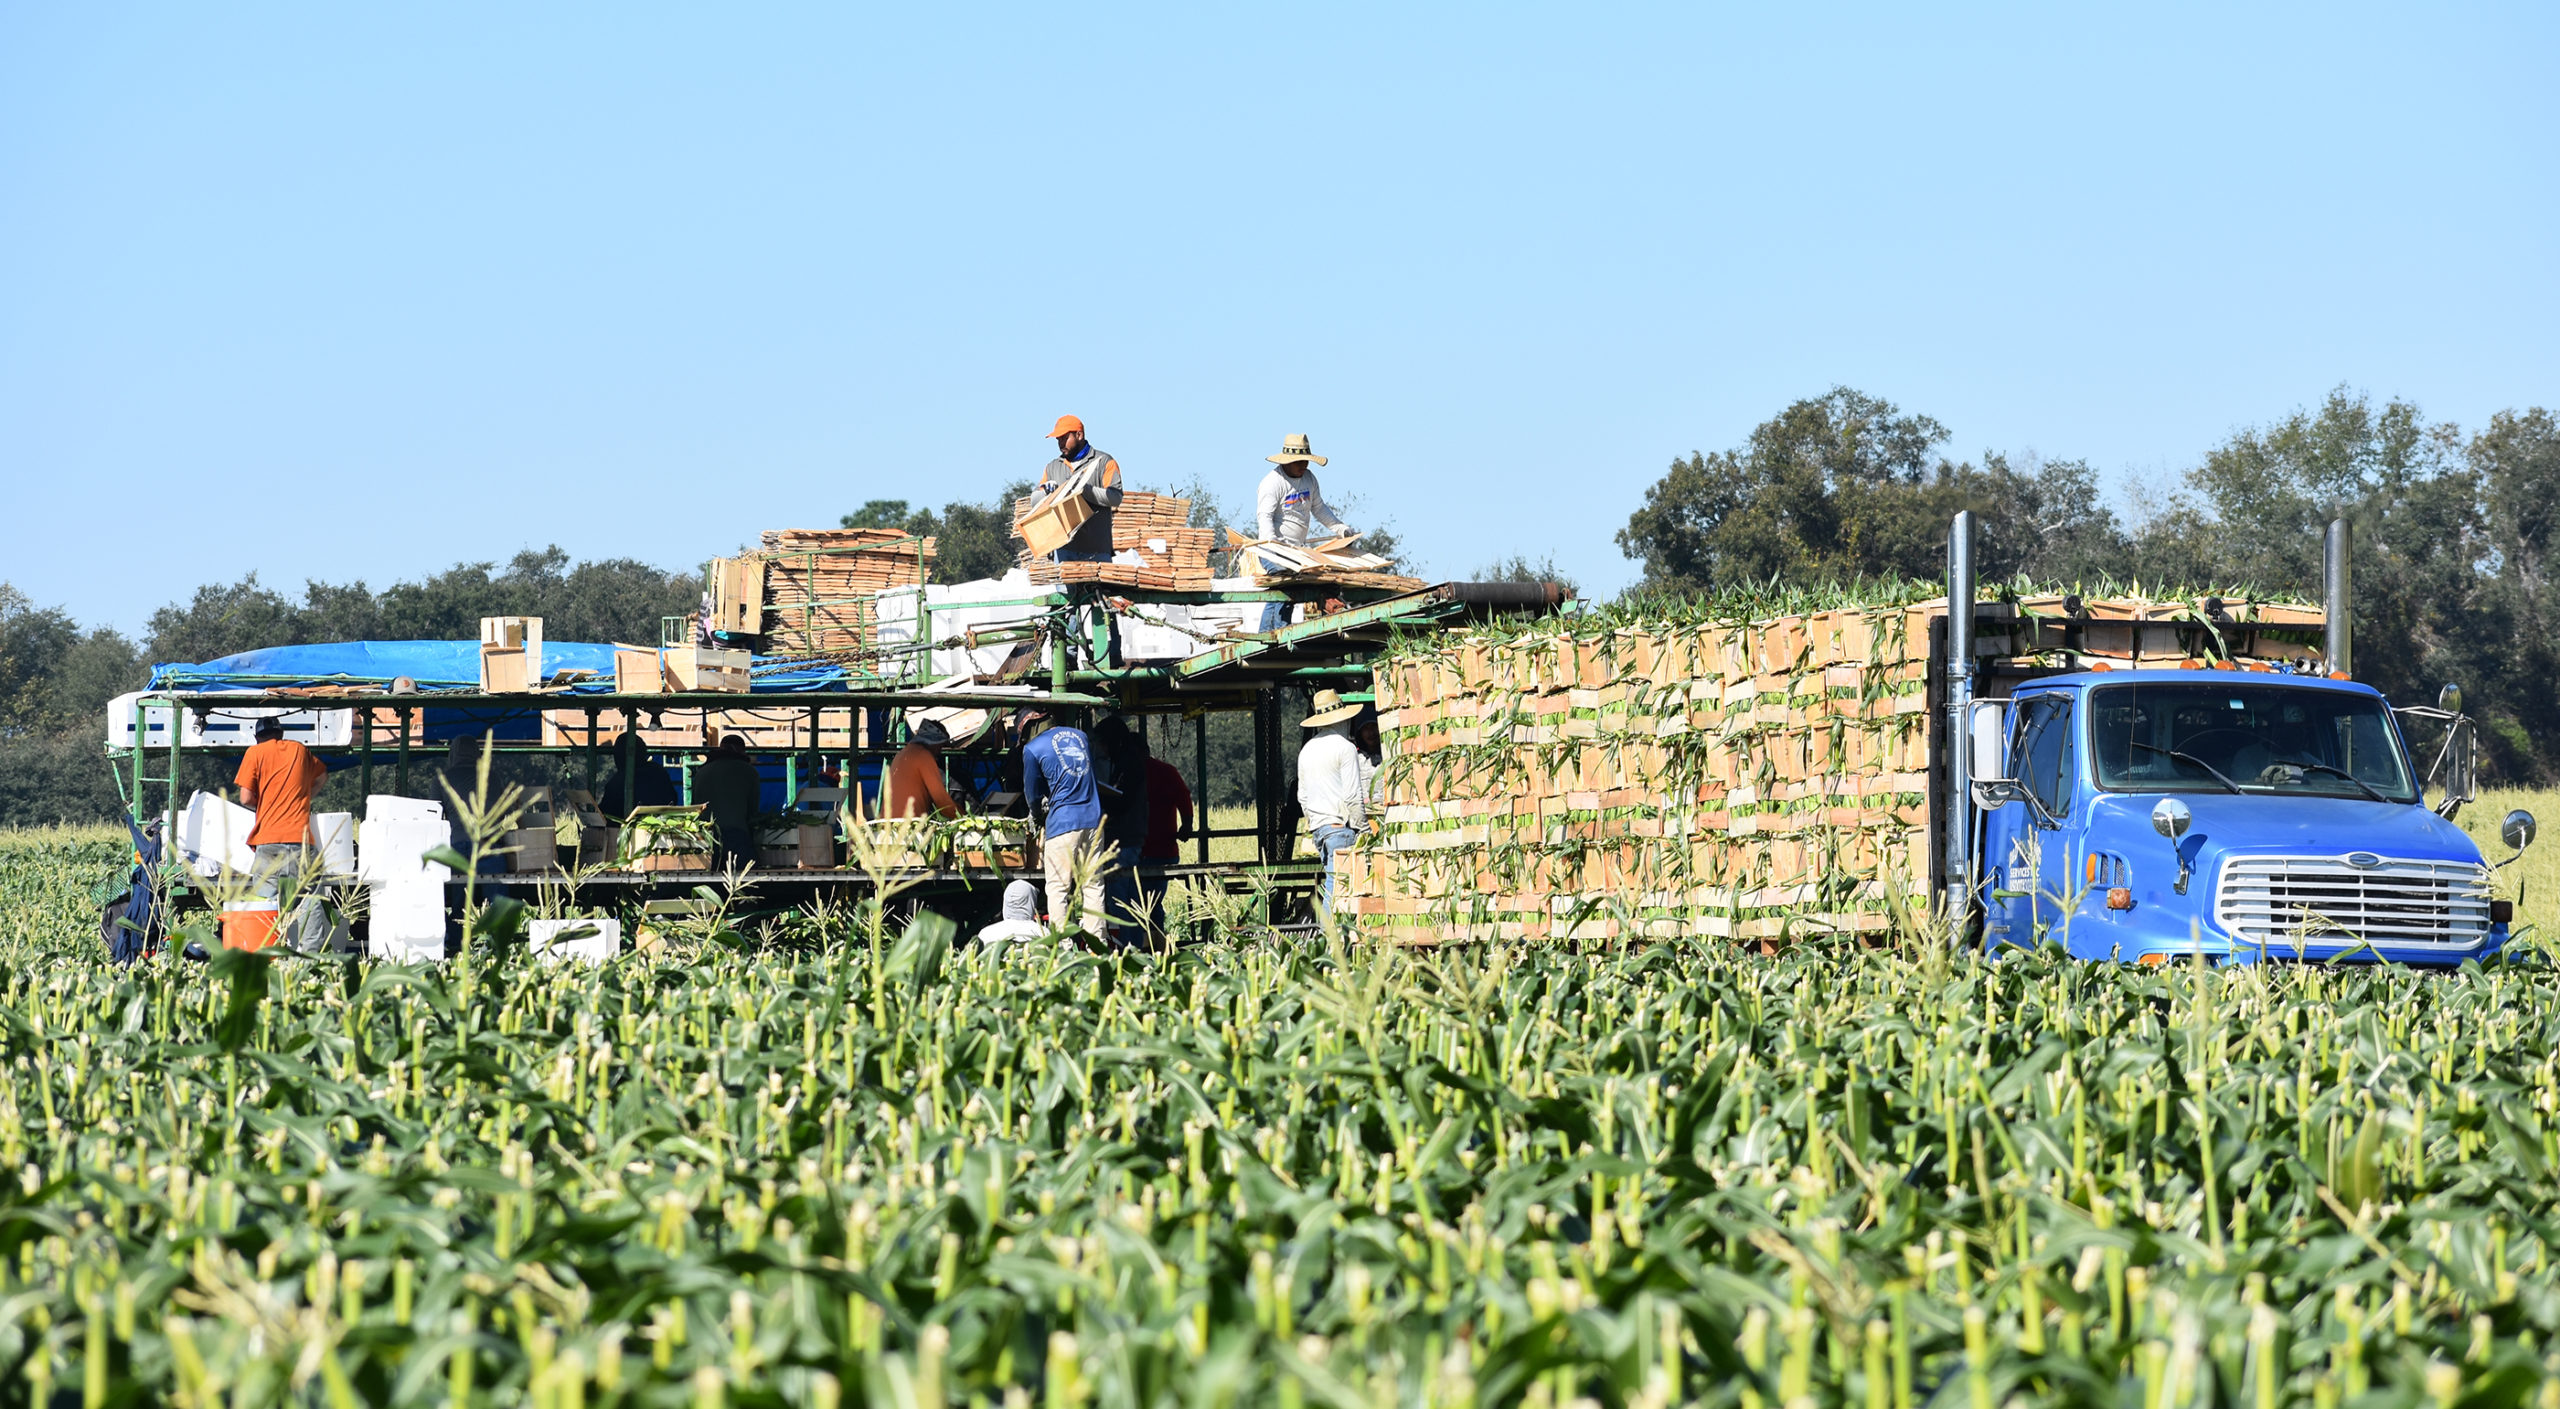 Featured image for “Prompt Response: GFVGA Advises Growers to Complete Farm Labor Surveys”